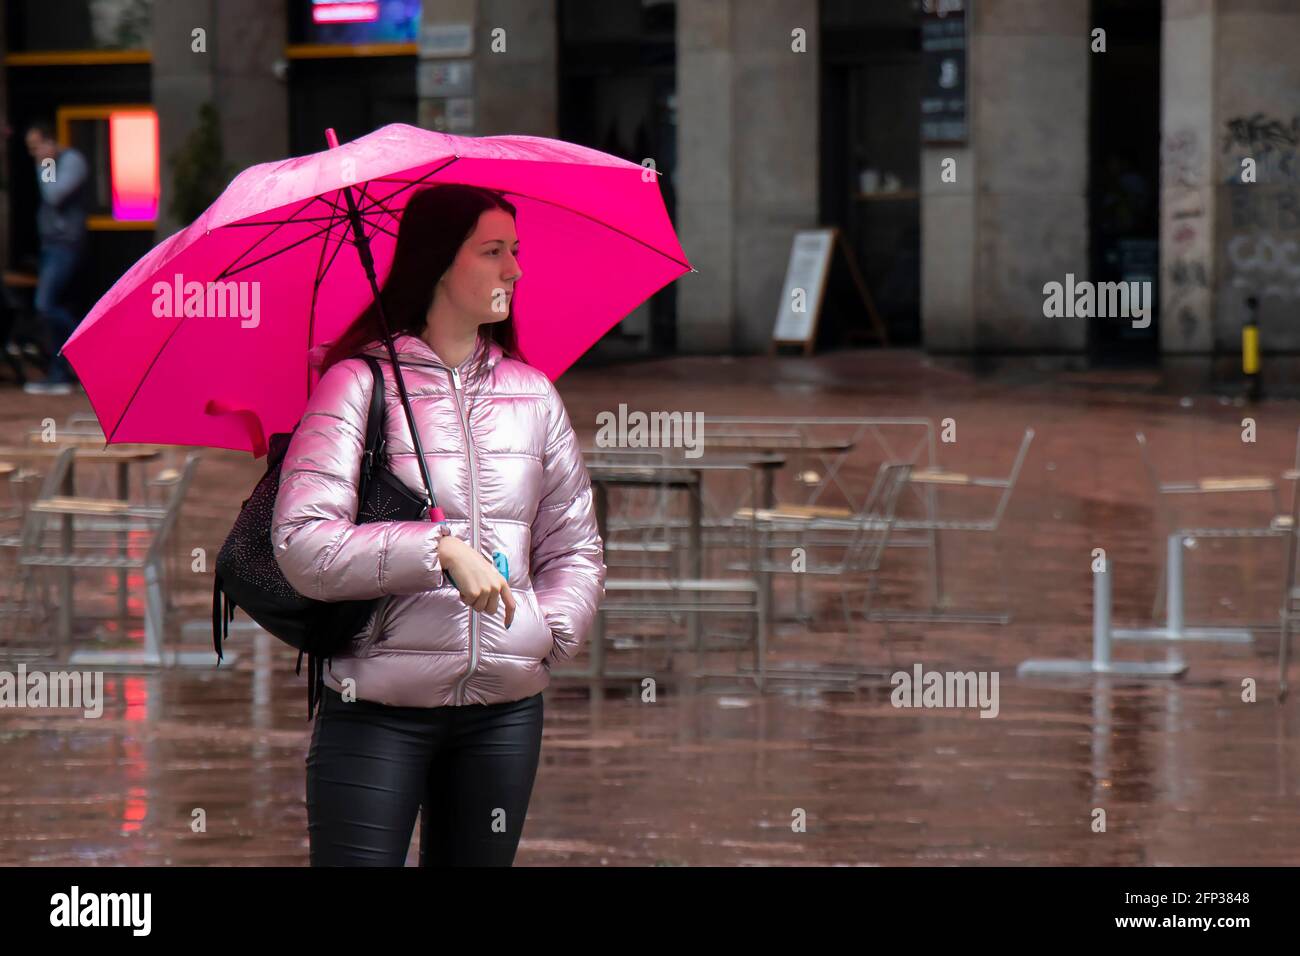 Belgrade, Serbia - May 13, 2021: One young woman standing alone under umbrella and waiting on city square on a rainy day Stock Photo